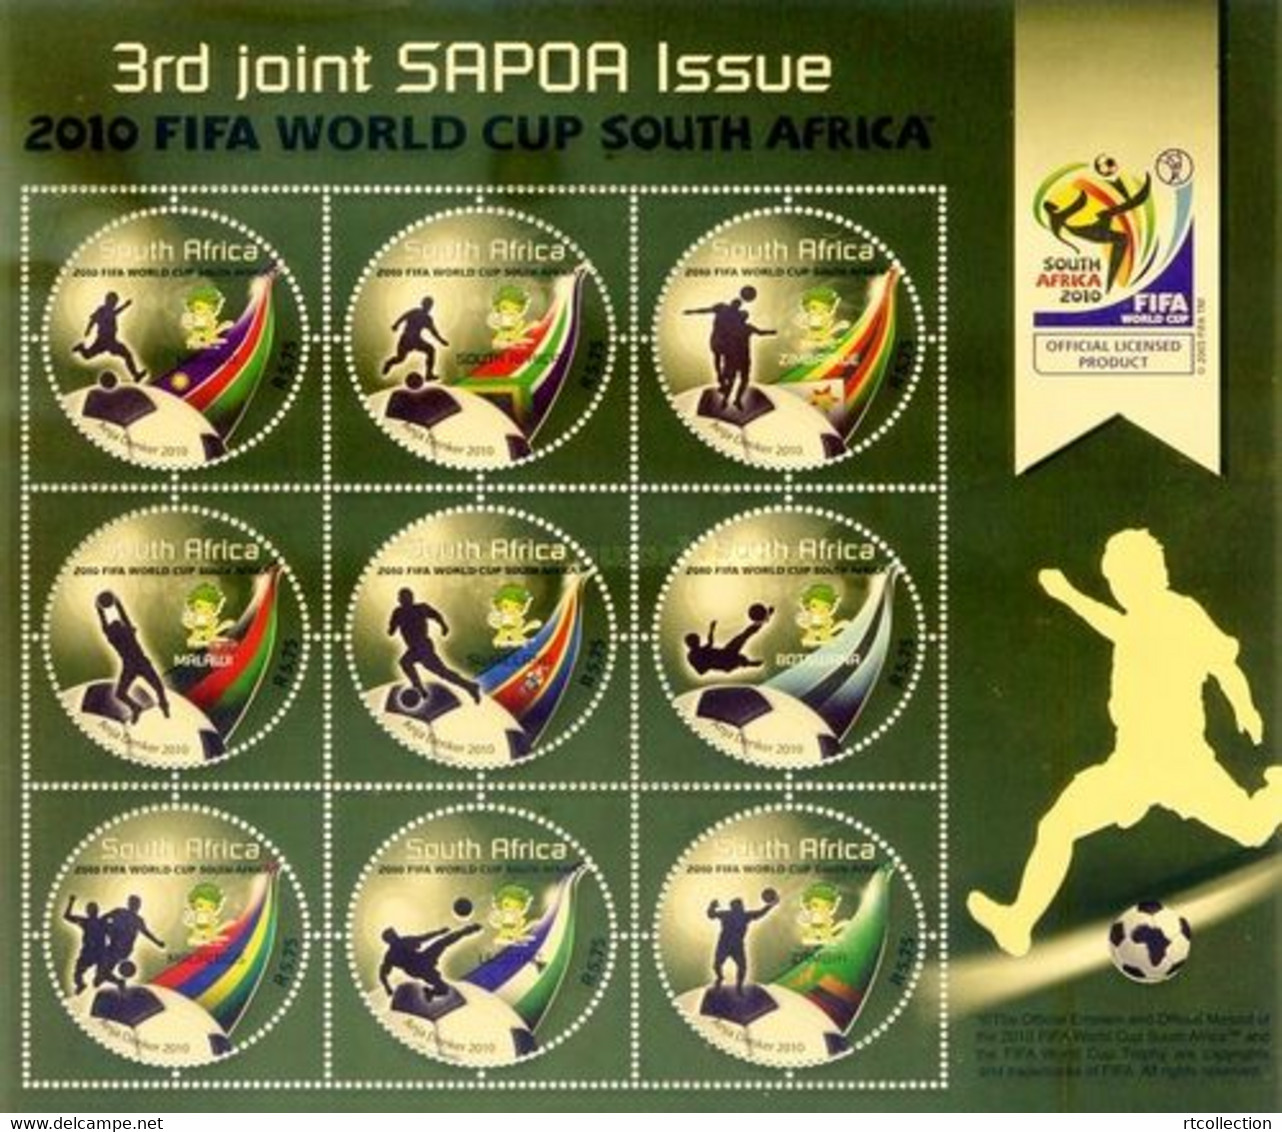 South Africa RSA 2010 Sheet 3rd Joint SAPOA Issue FIFA World Cup Football Game Soccer Sports Round Shap Stamps MNH - Unused Stamps